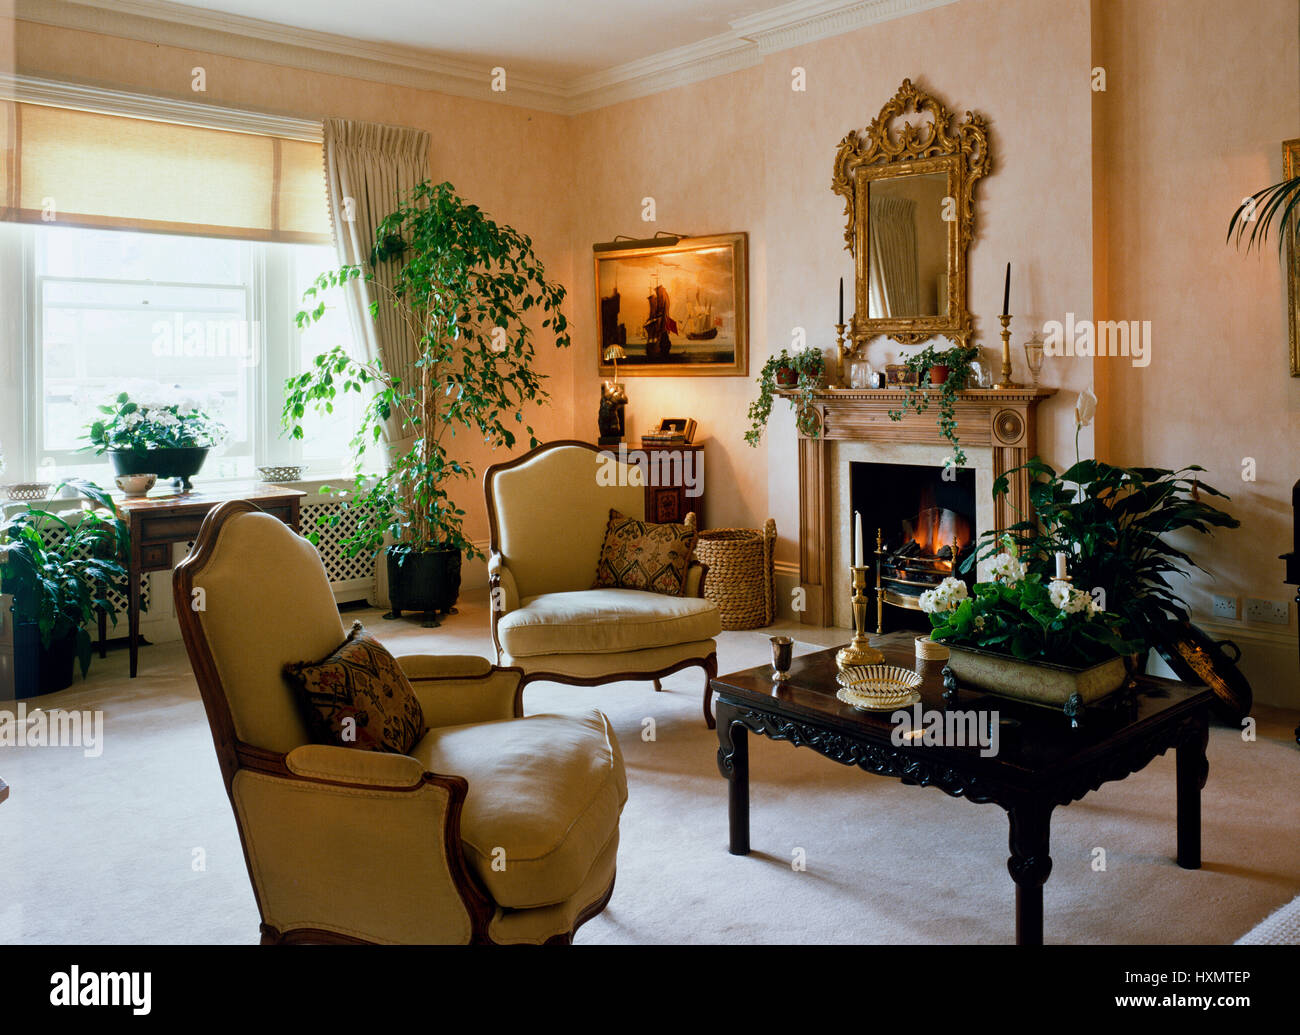 Country style living room. Stock Photo